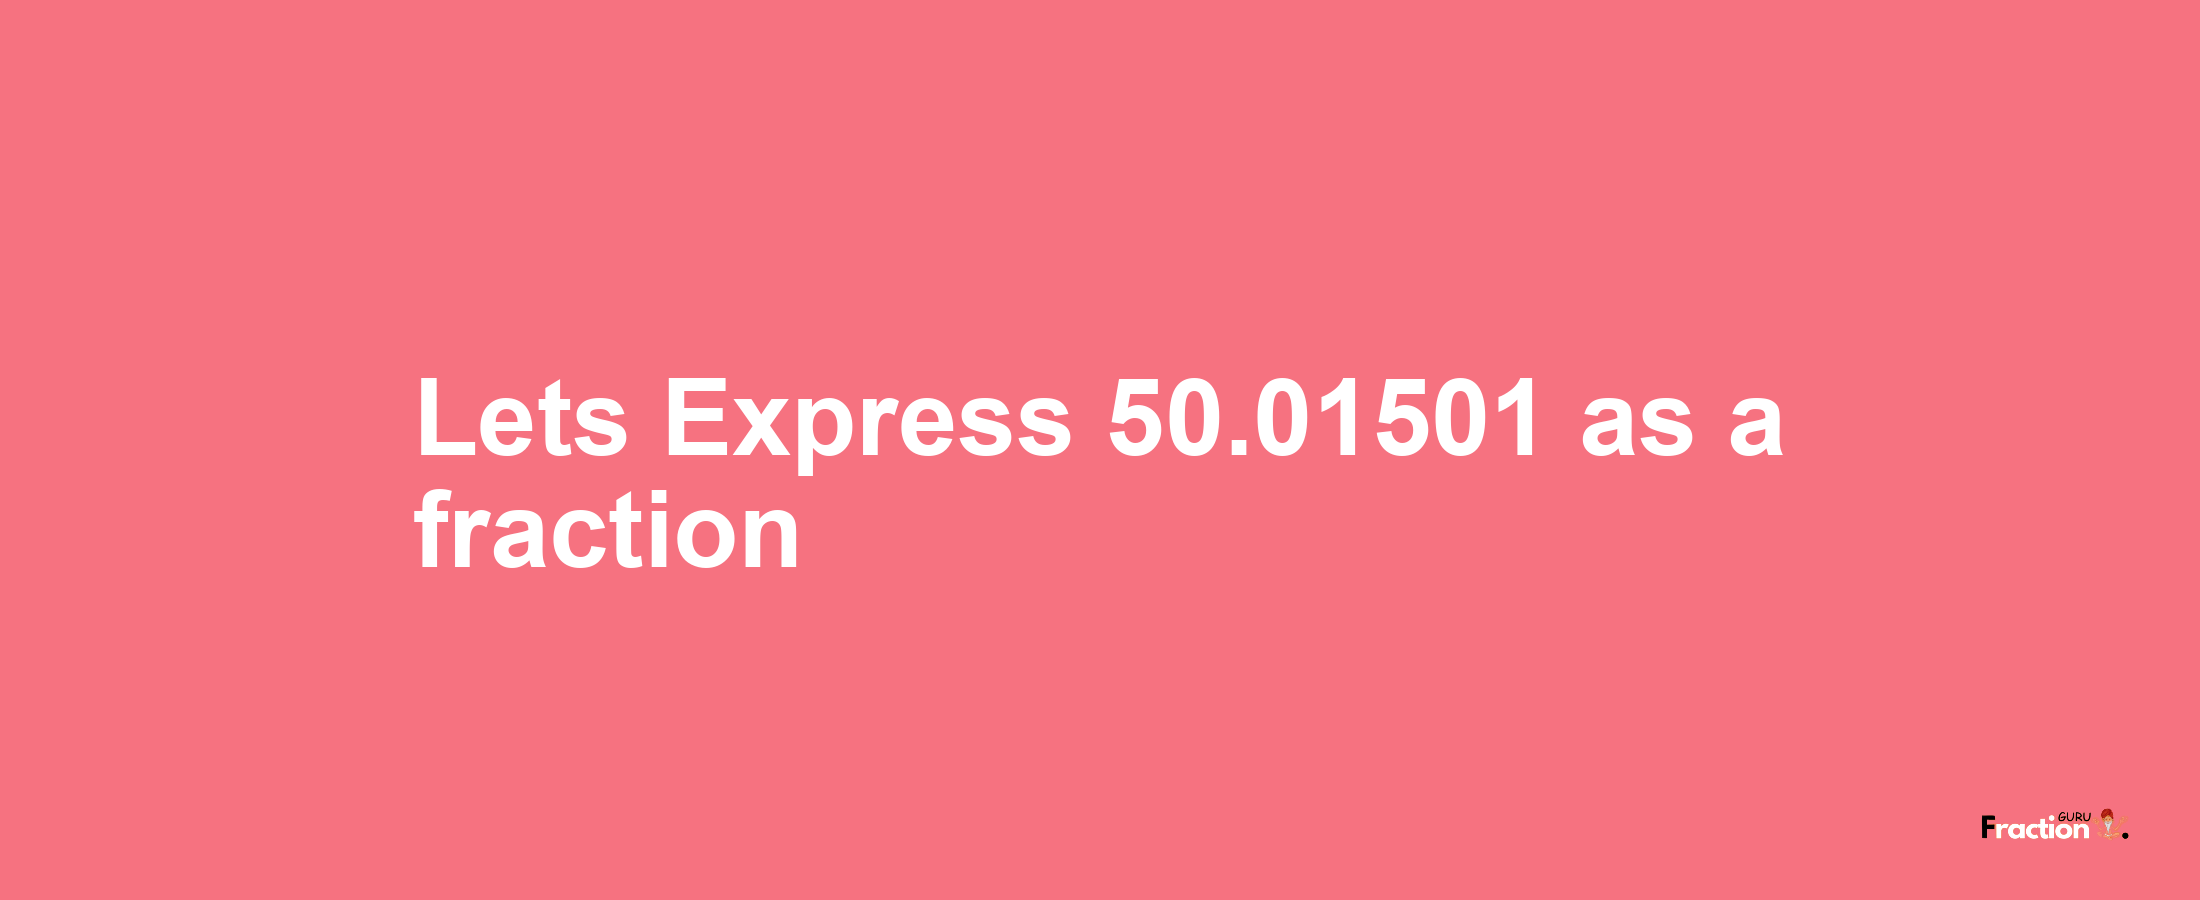 Lets Express 50.01501 as afraction